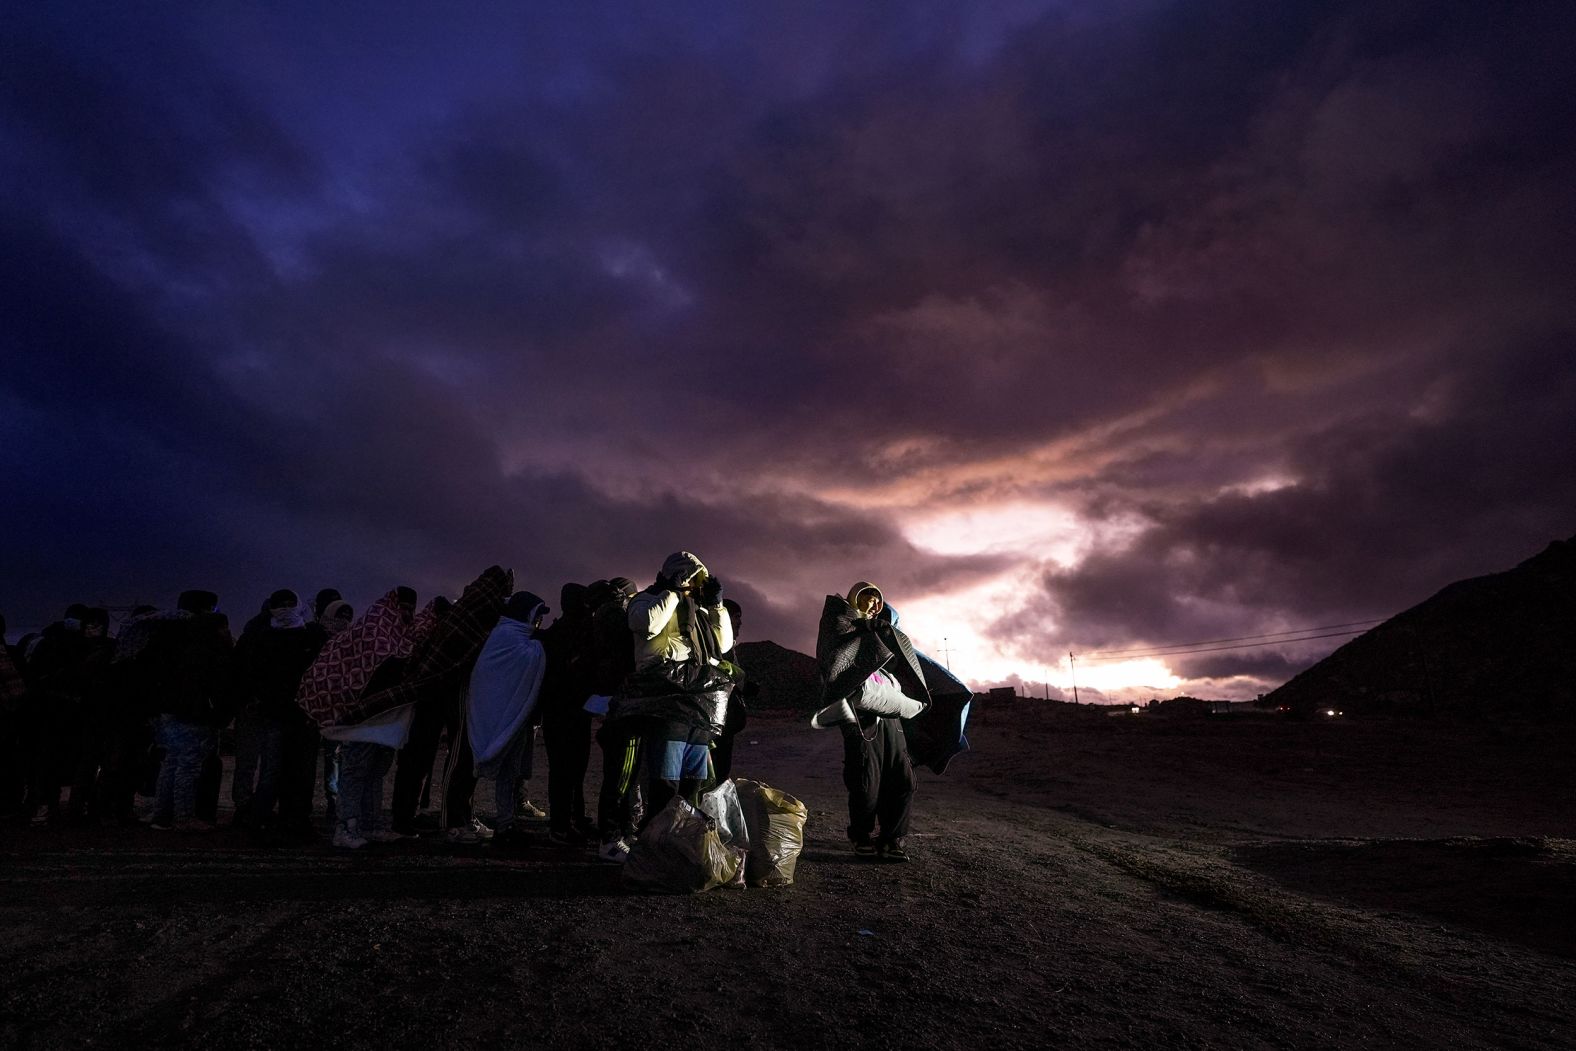 Migrants, wrapped in blankets to ward off the heavy wind and rain, line up to be processed by the US Border Patrol after they illegally crossed into a mountainous area near Jacumba Hot Springs, California, on Friday, February 2.